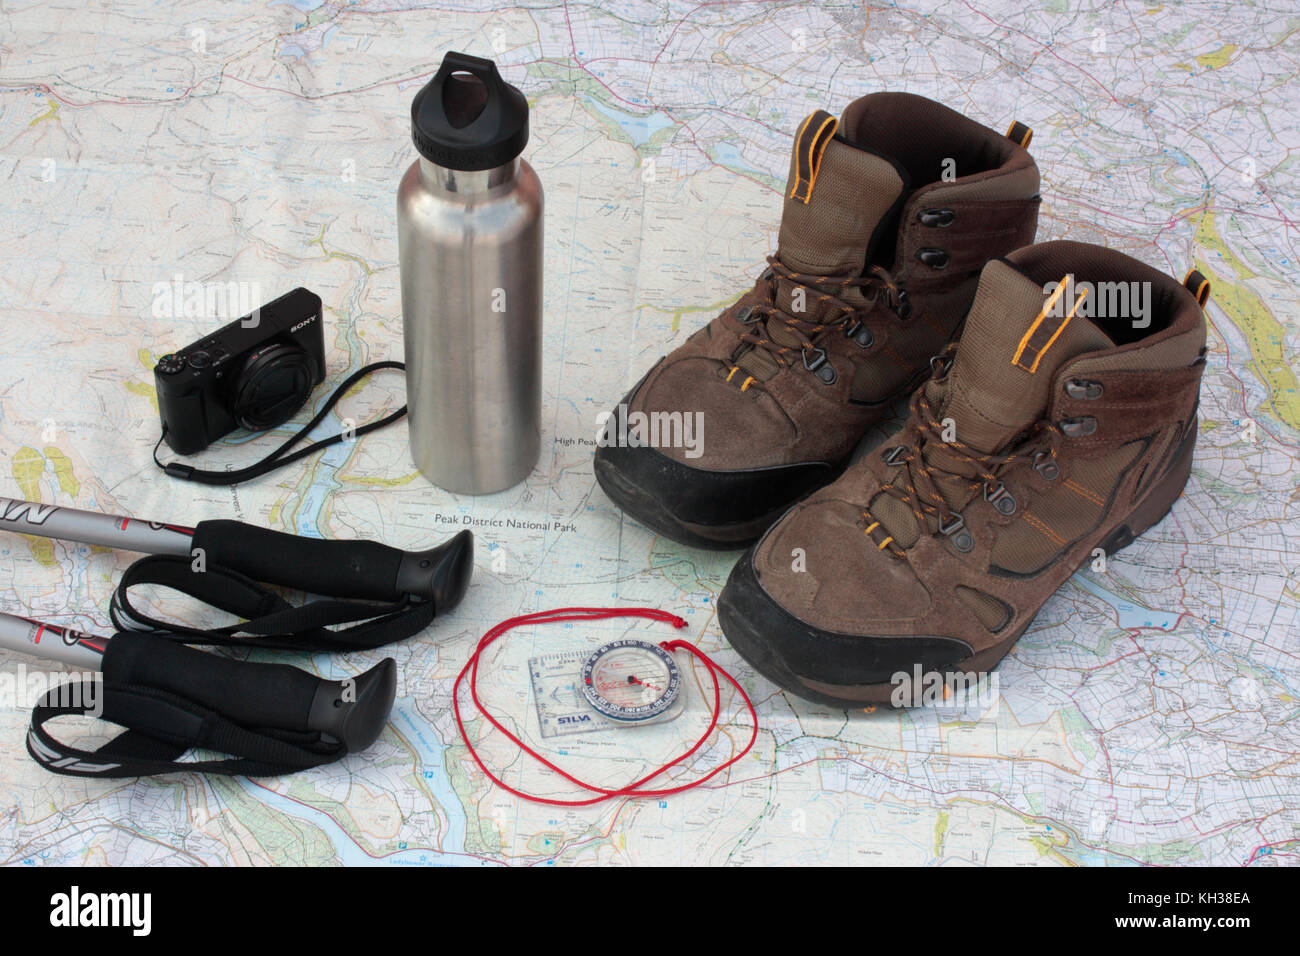 Trekking in the UK. Walking poles, digital camera, water flask, compass and hiking boots set out on a map of Peak District National Park Stock Photo